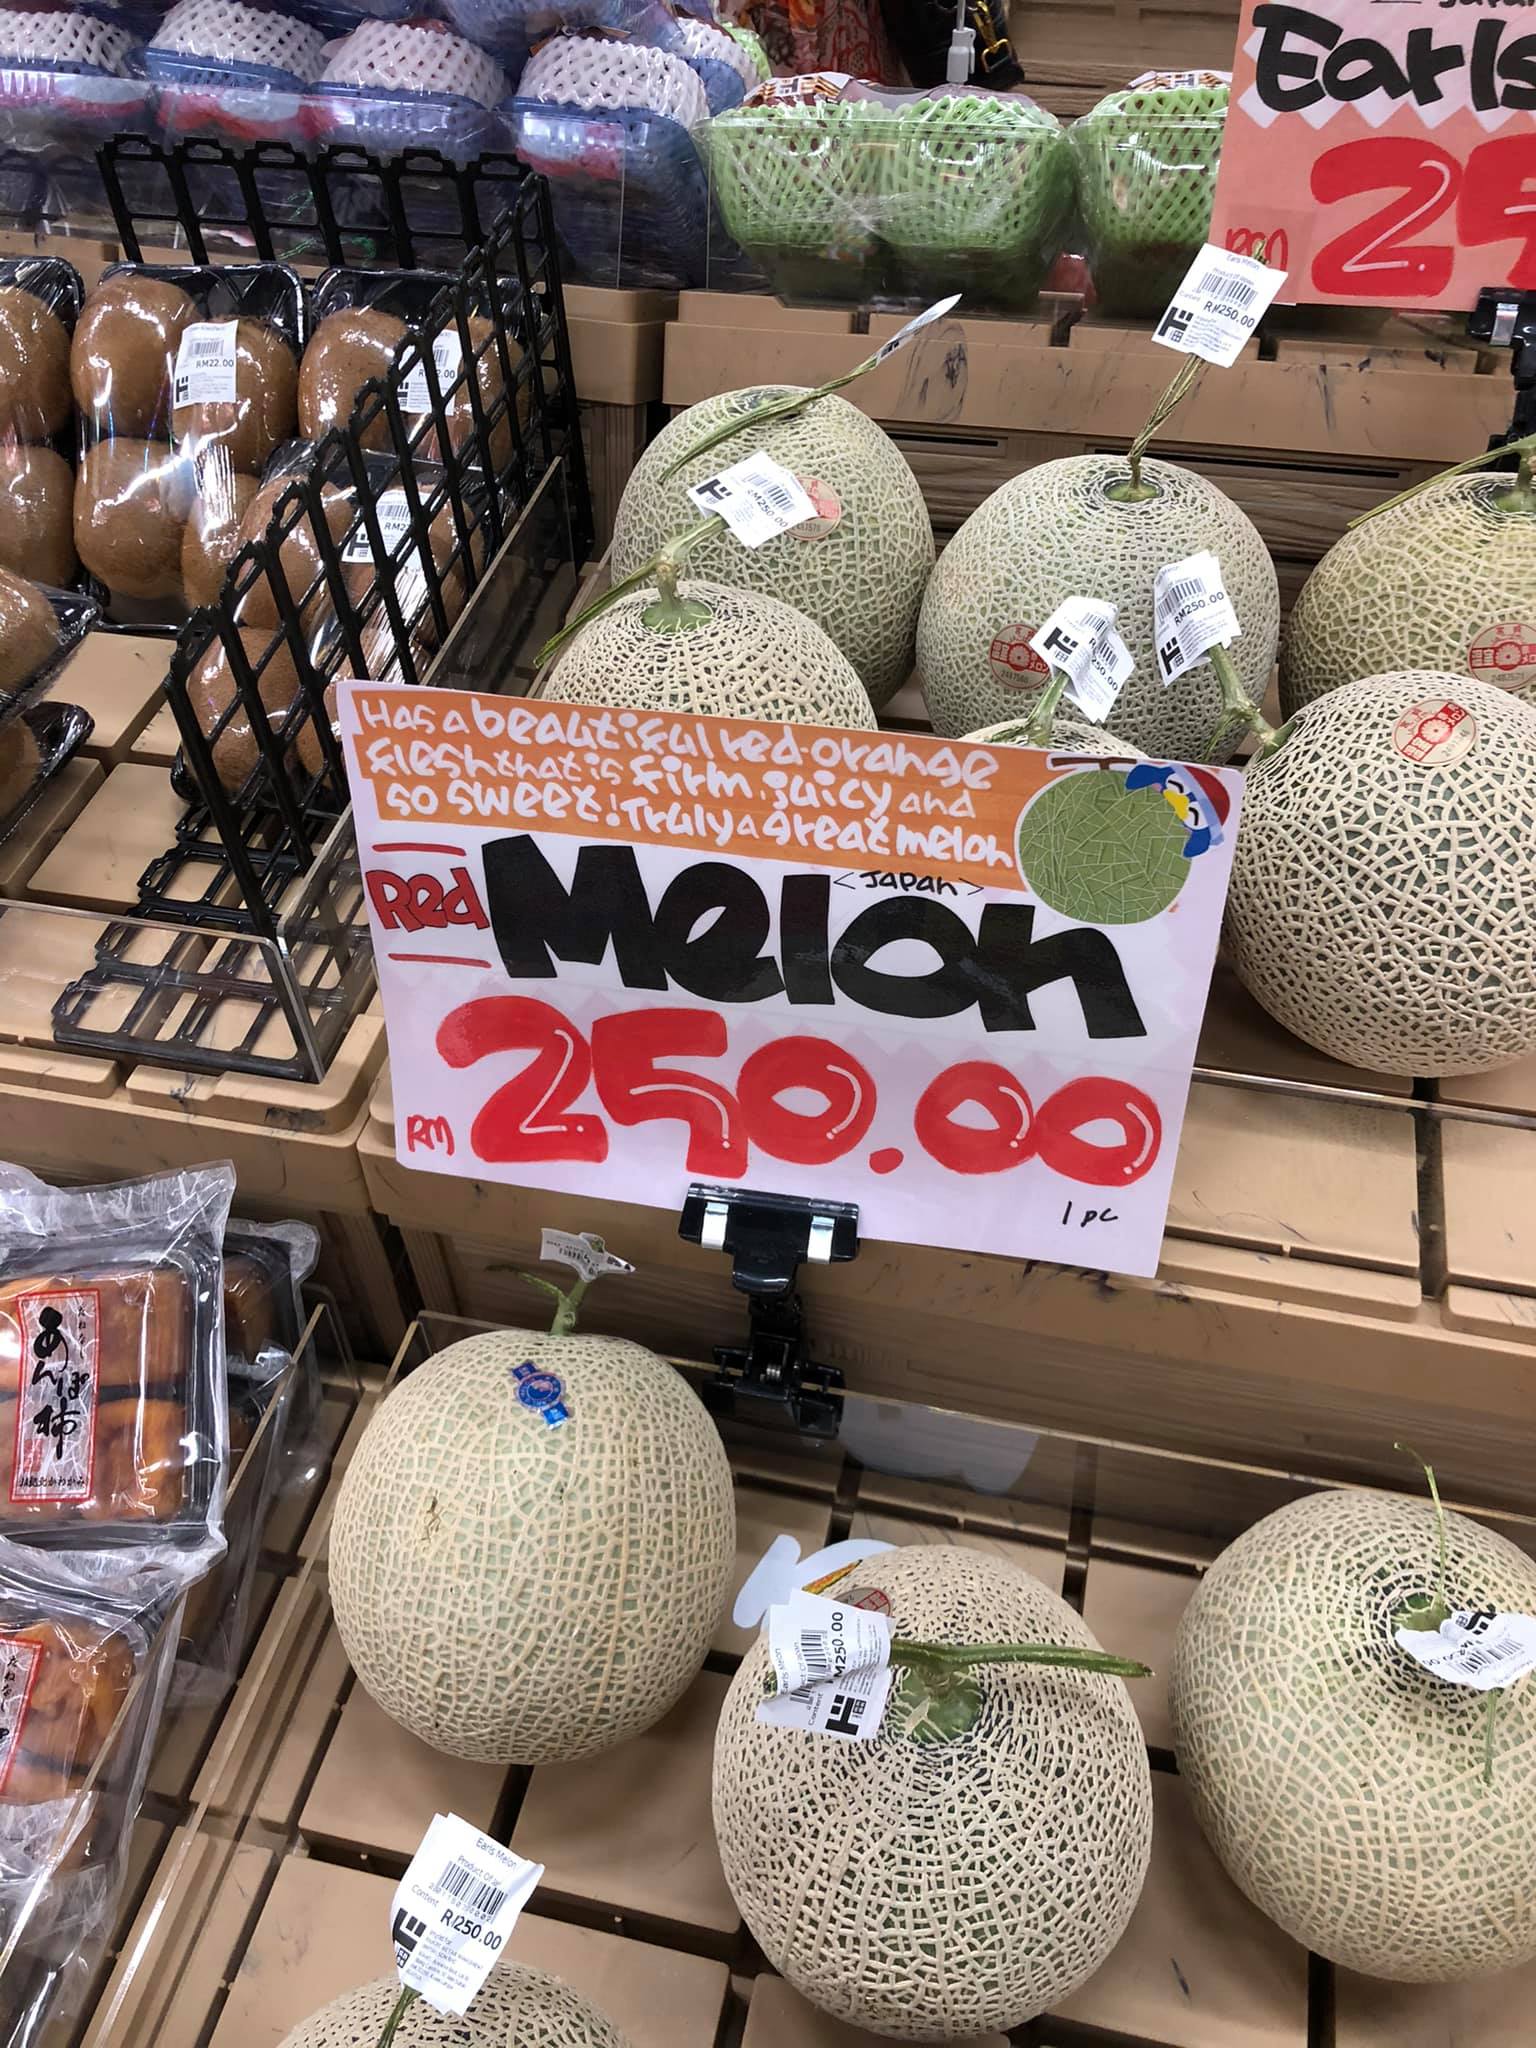 Woman surprised by price of Japanese melon - Don Don Donki